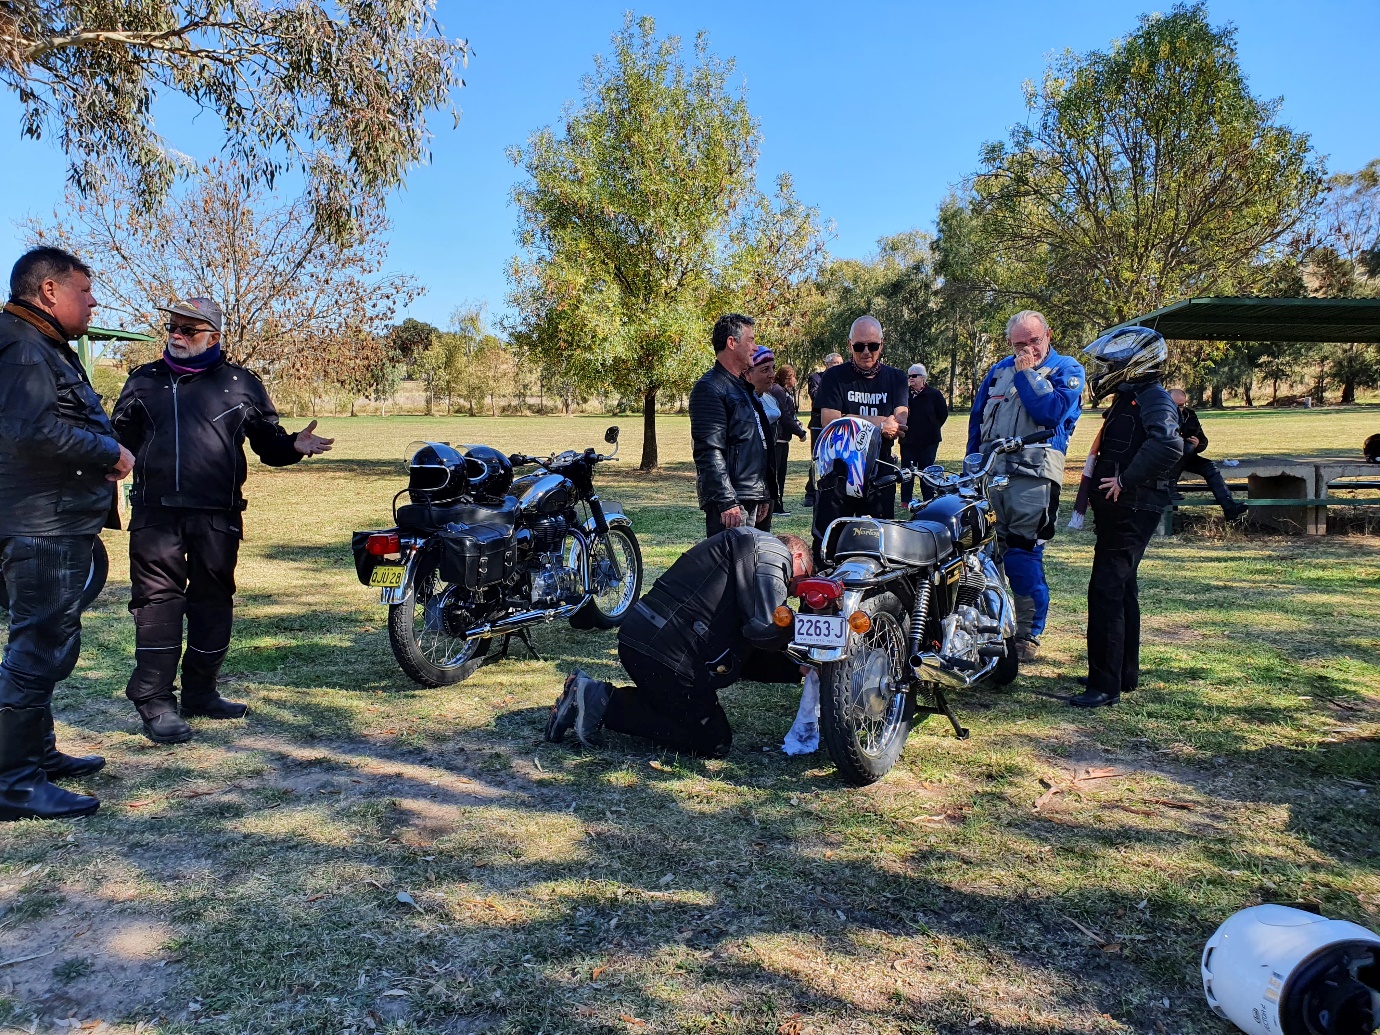 A group of people stand around motorcycles

Description automatically generated with medium confidence